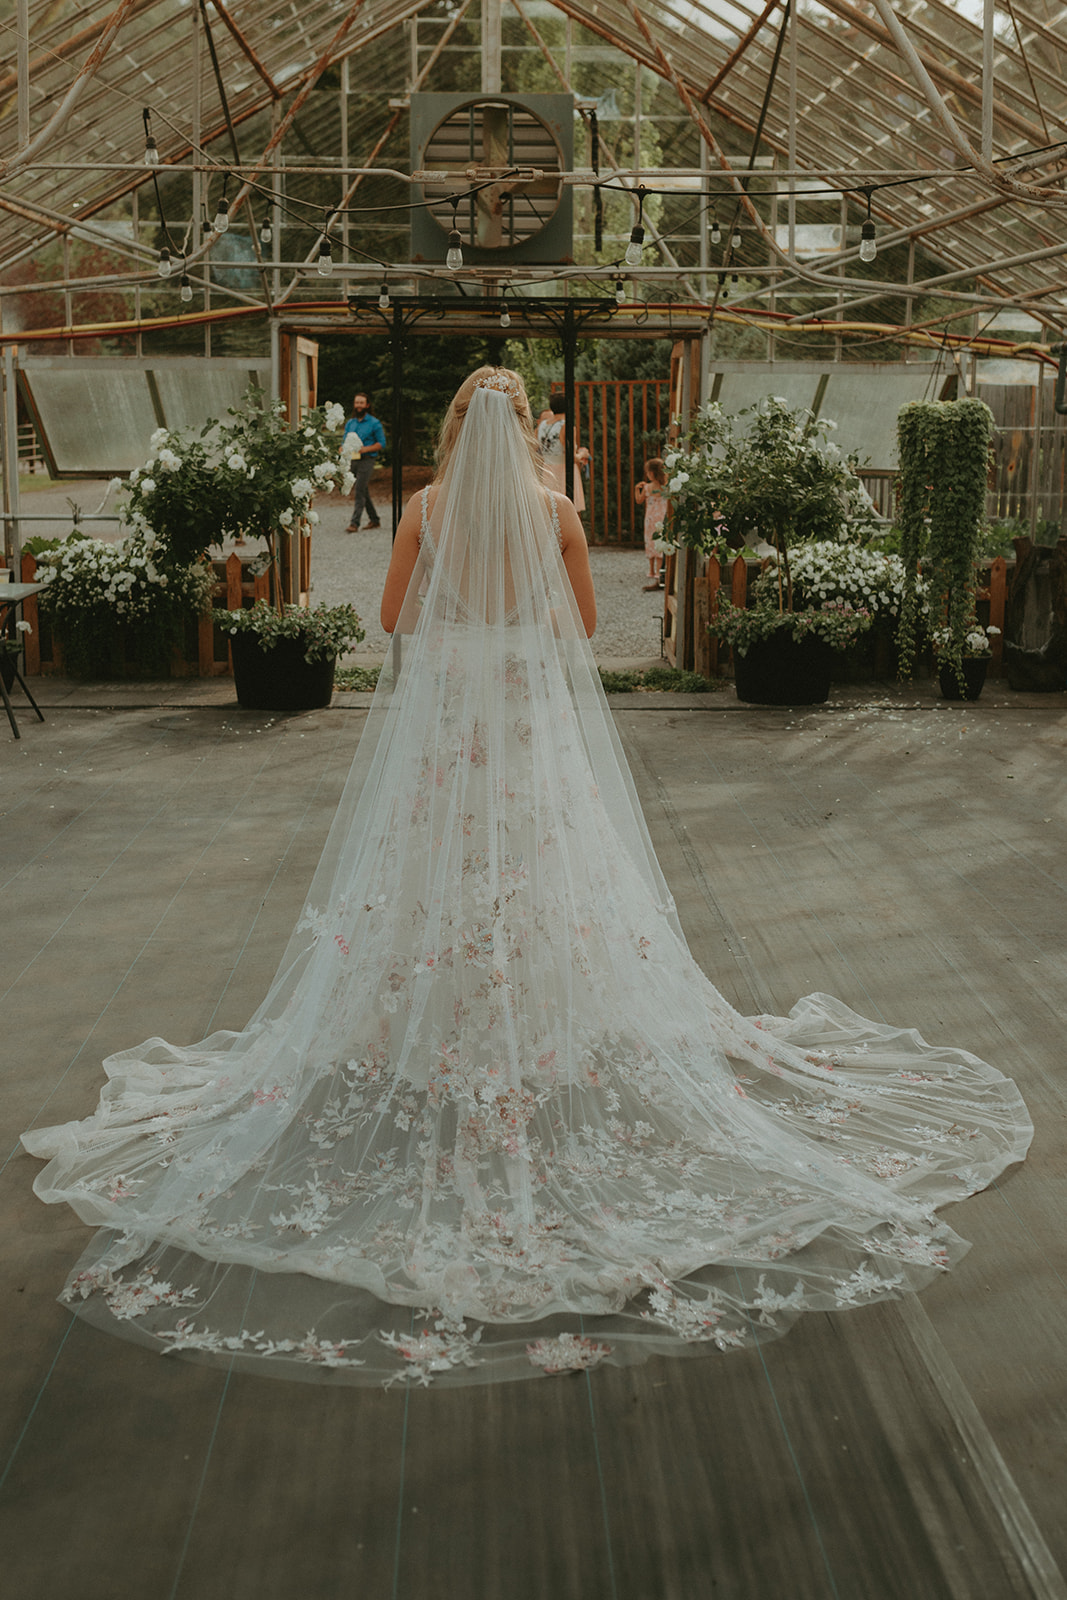 Bridal portrait with floral wedding gown and matching cathedral floral veil. Non-traditional bridal style, Wildflower greenhouse wedding, outdoor wedding inspiration, alternative wedding inspiration, boho wedding inspiration, patterned wedding dress